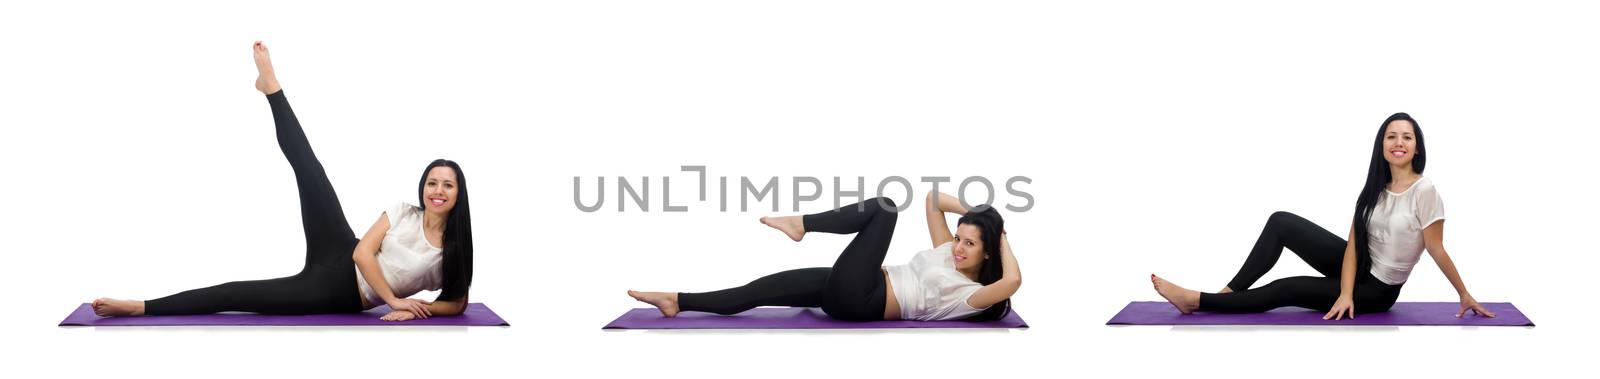 Woman doing exercises on white by Elnur